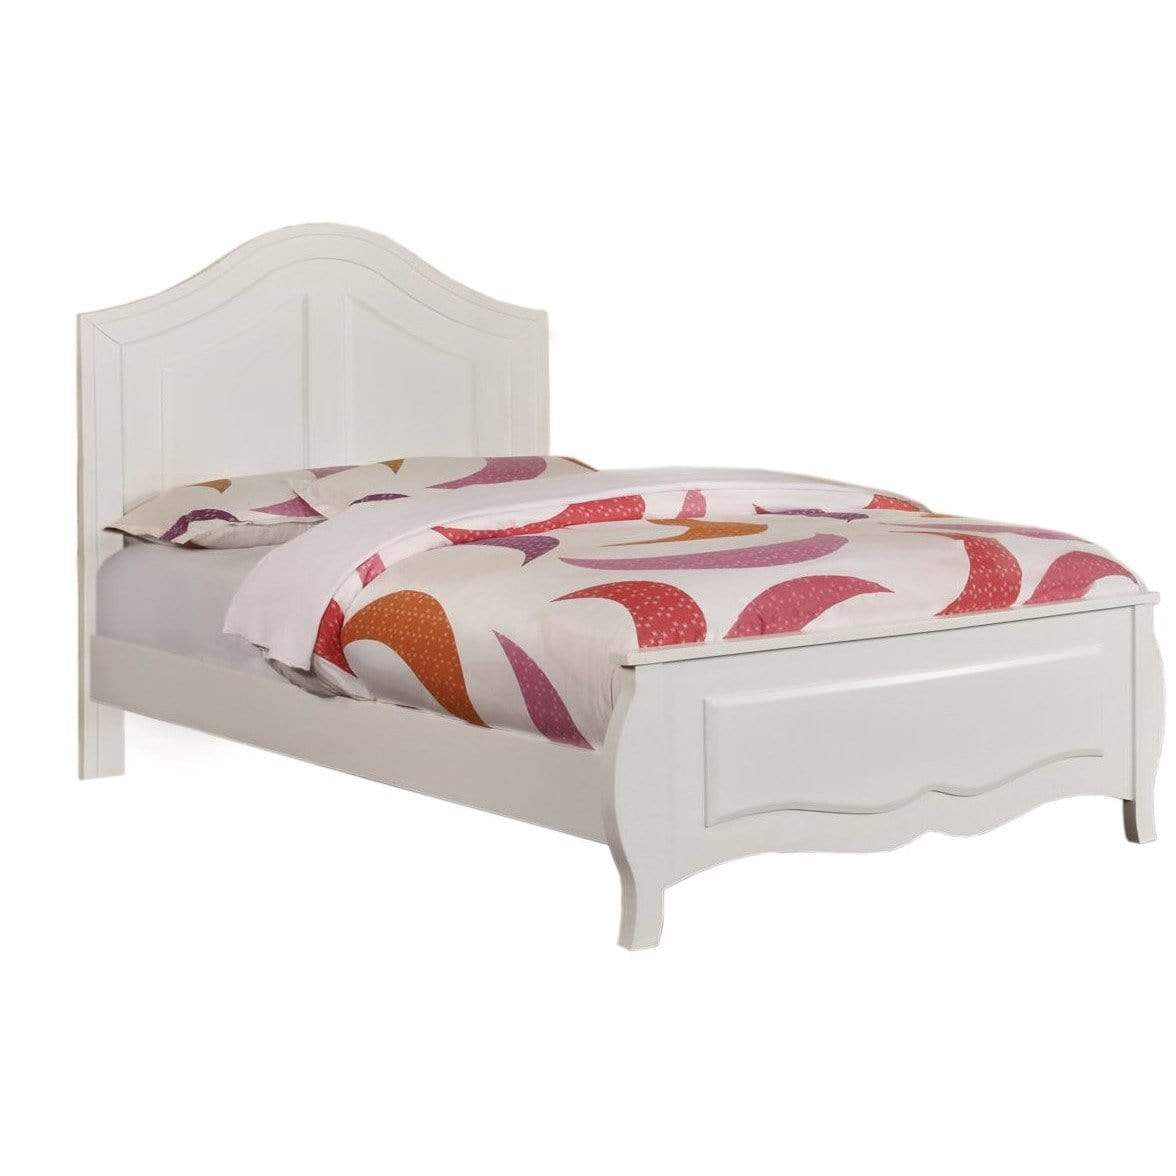 Furniture of America Beds Dallas Cottage Twin Bed